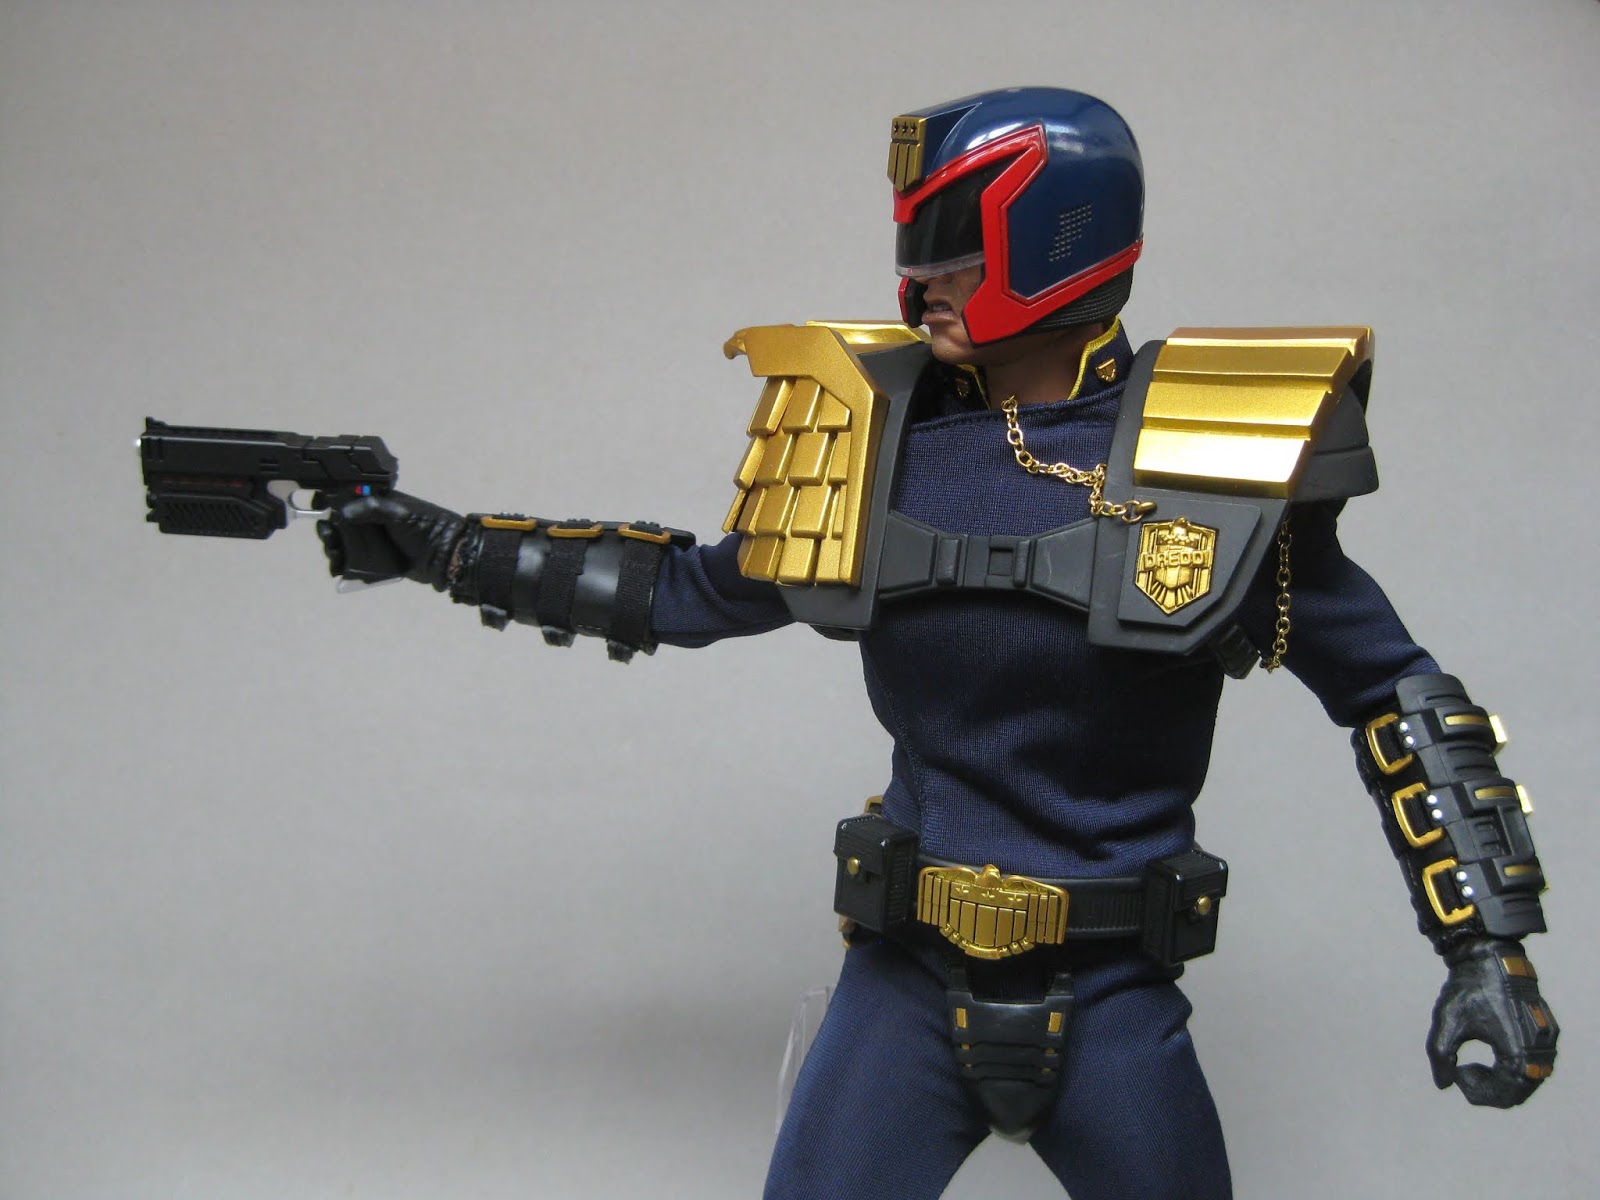 Now, Judge Dredd is ready to kick some ass with his Lawgiver "One Shot...